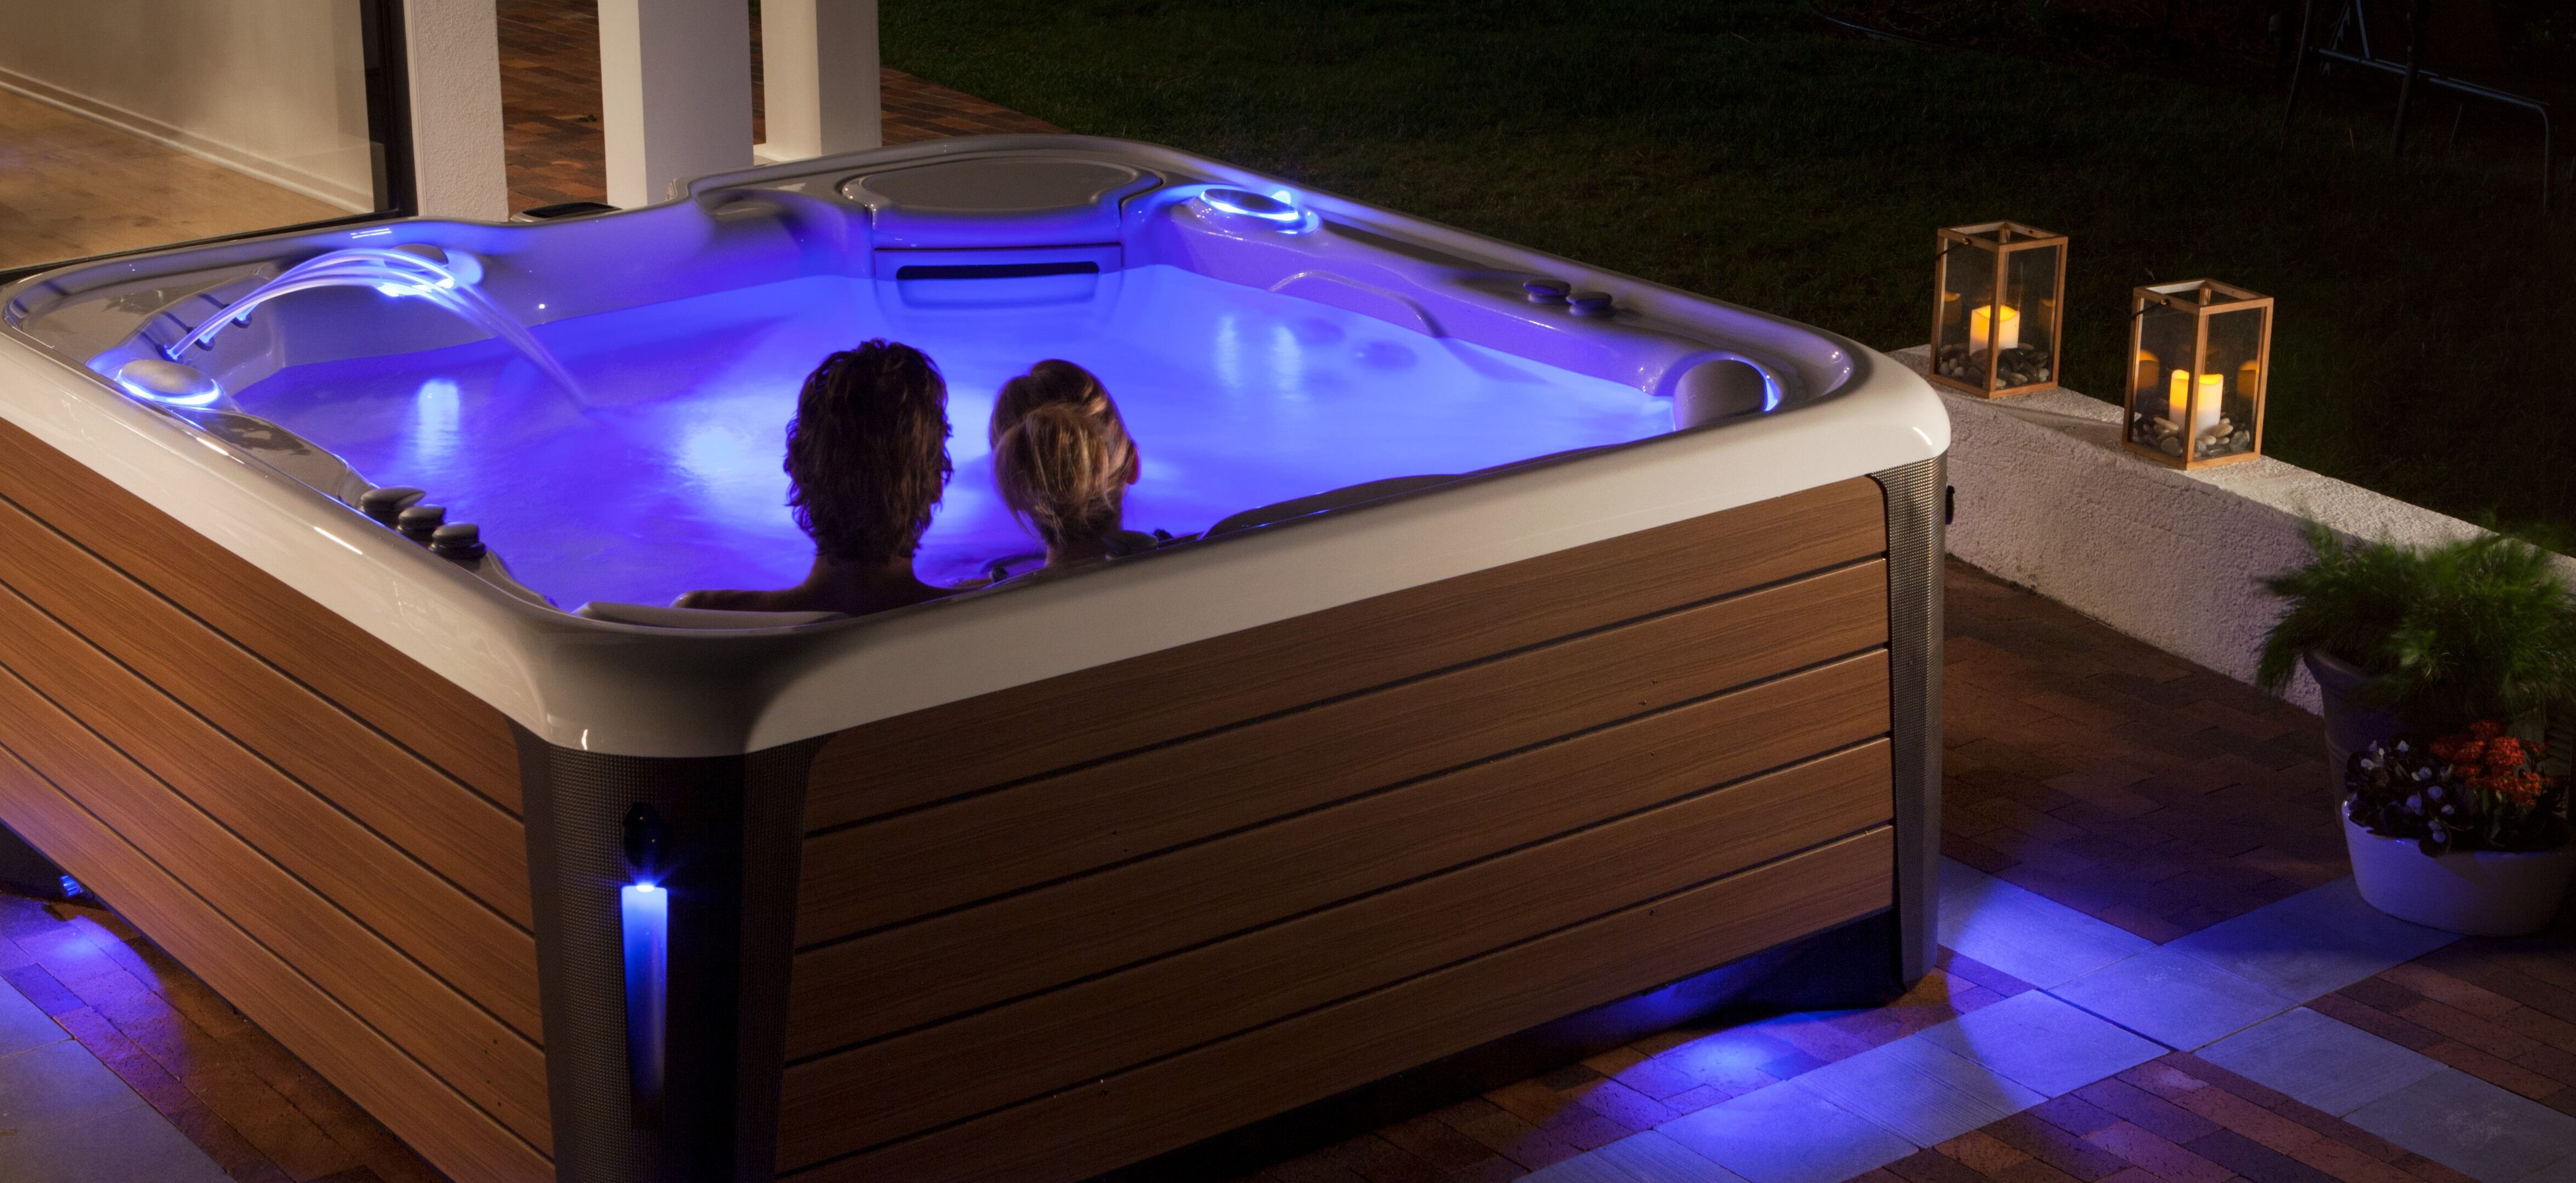 How to Identify a Quality Hot Tub